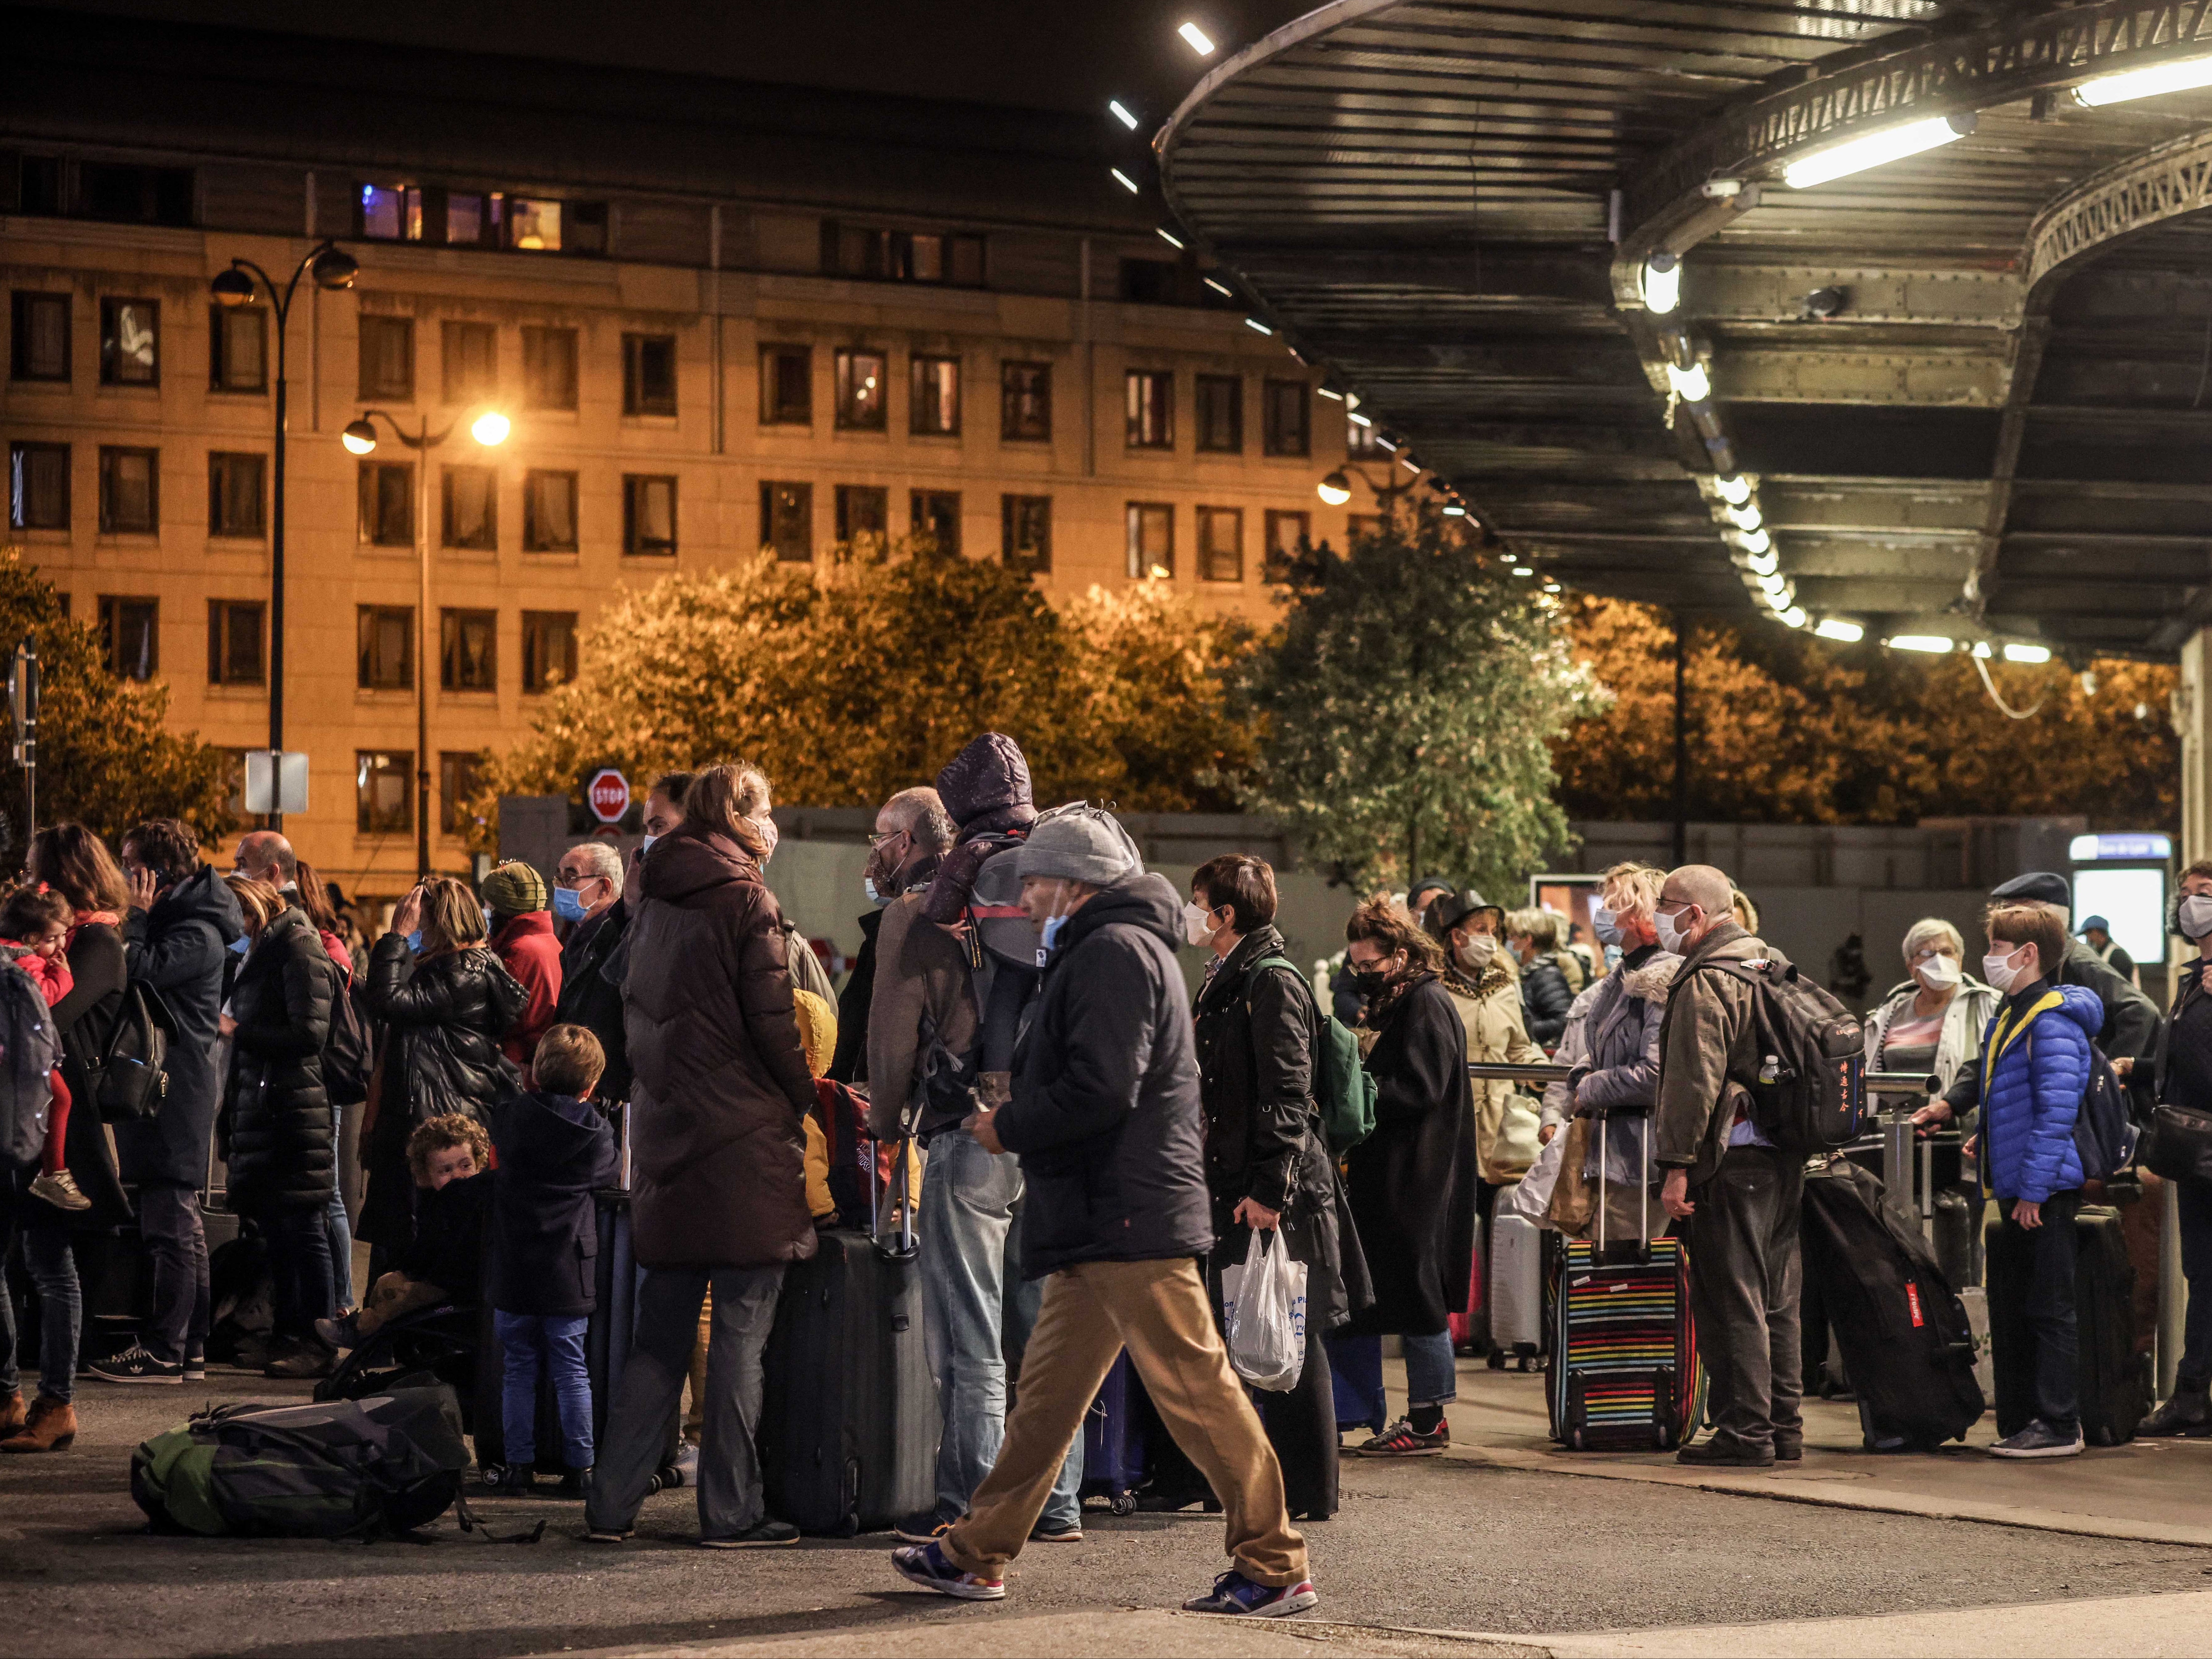 Crowds gather outside Gare de Lyon as residents attempt to avoid being locked down in the capital